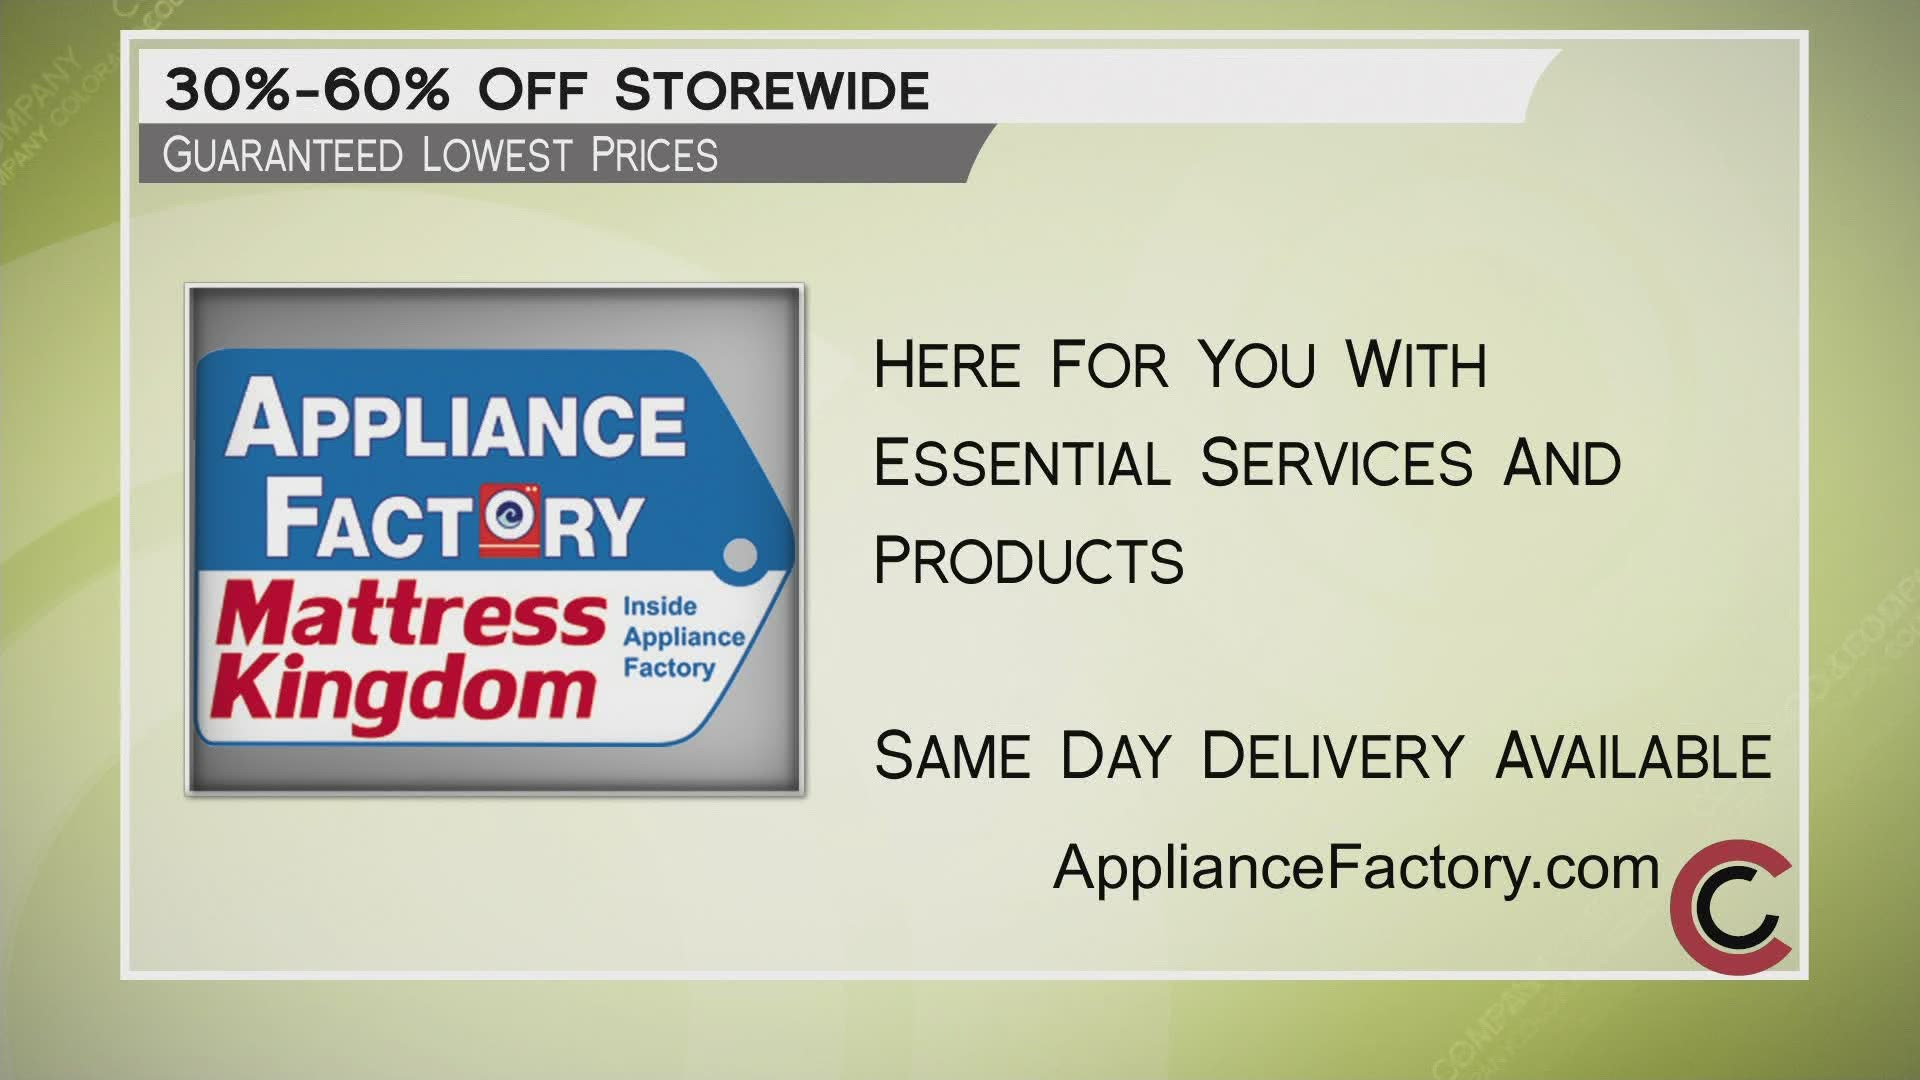 Check out ApplianceFactory.com and save between 30% and 60%!